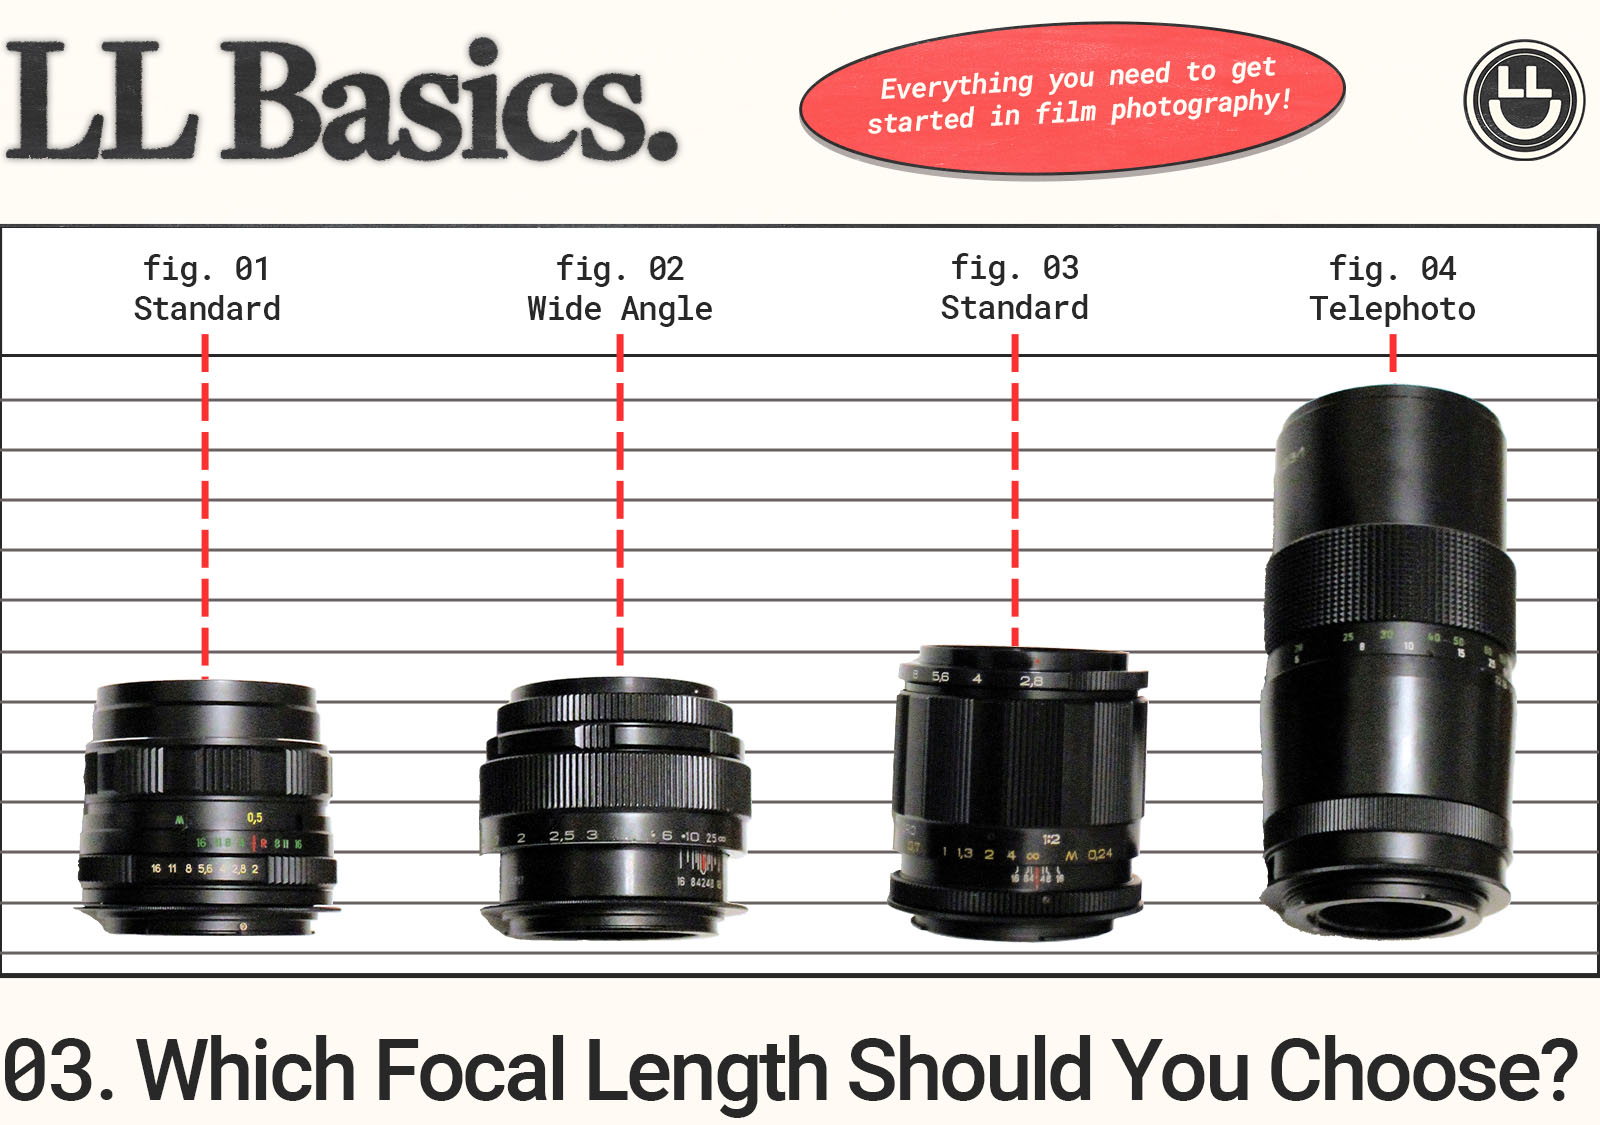 Which focal length should you choose?